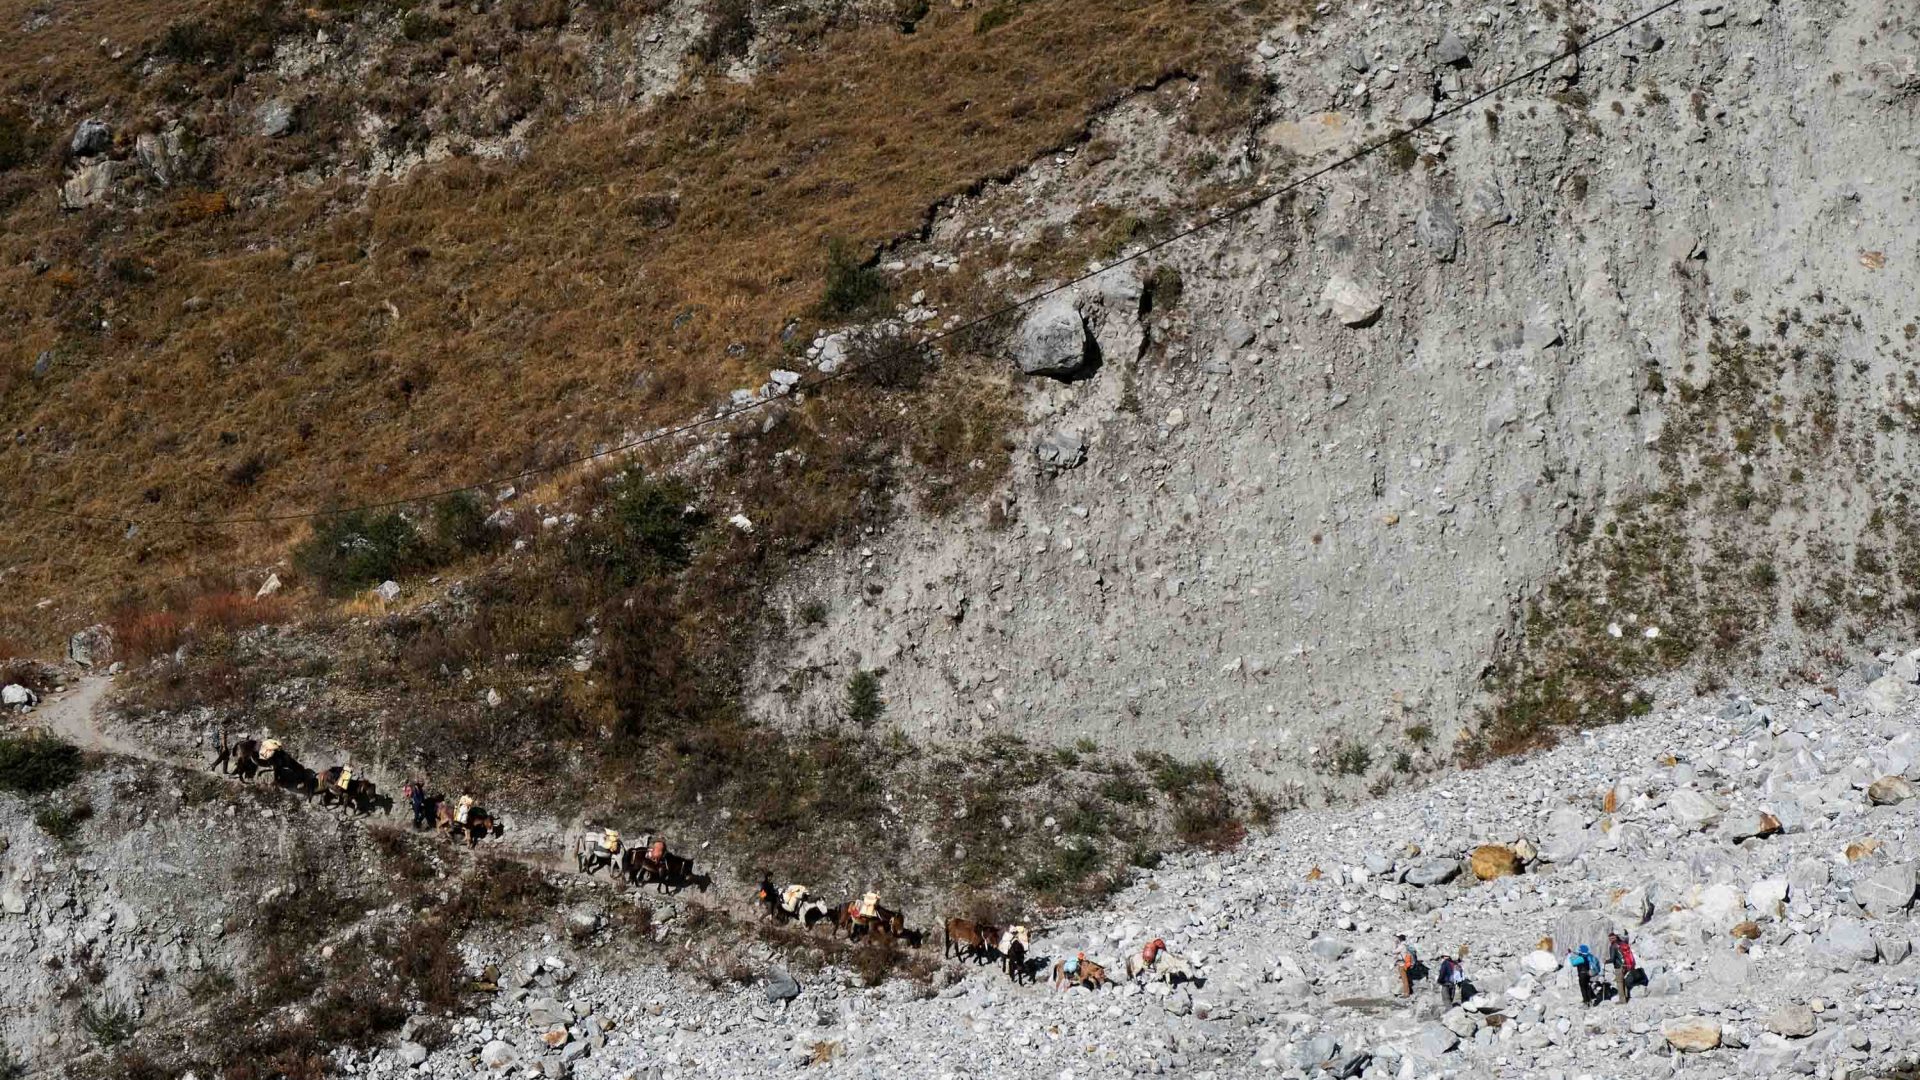 Yaks and people make their way up a path strewn with boulders.